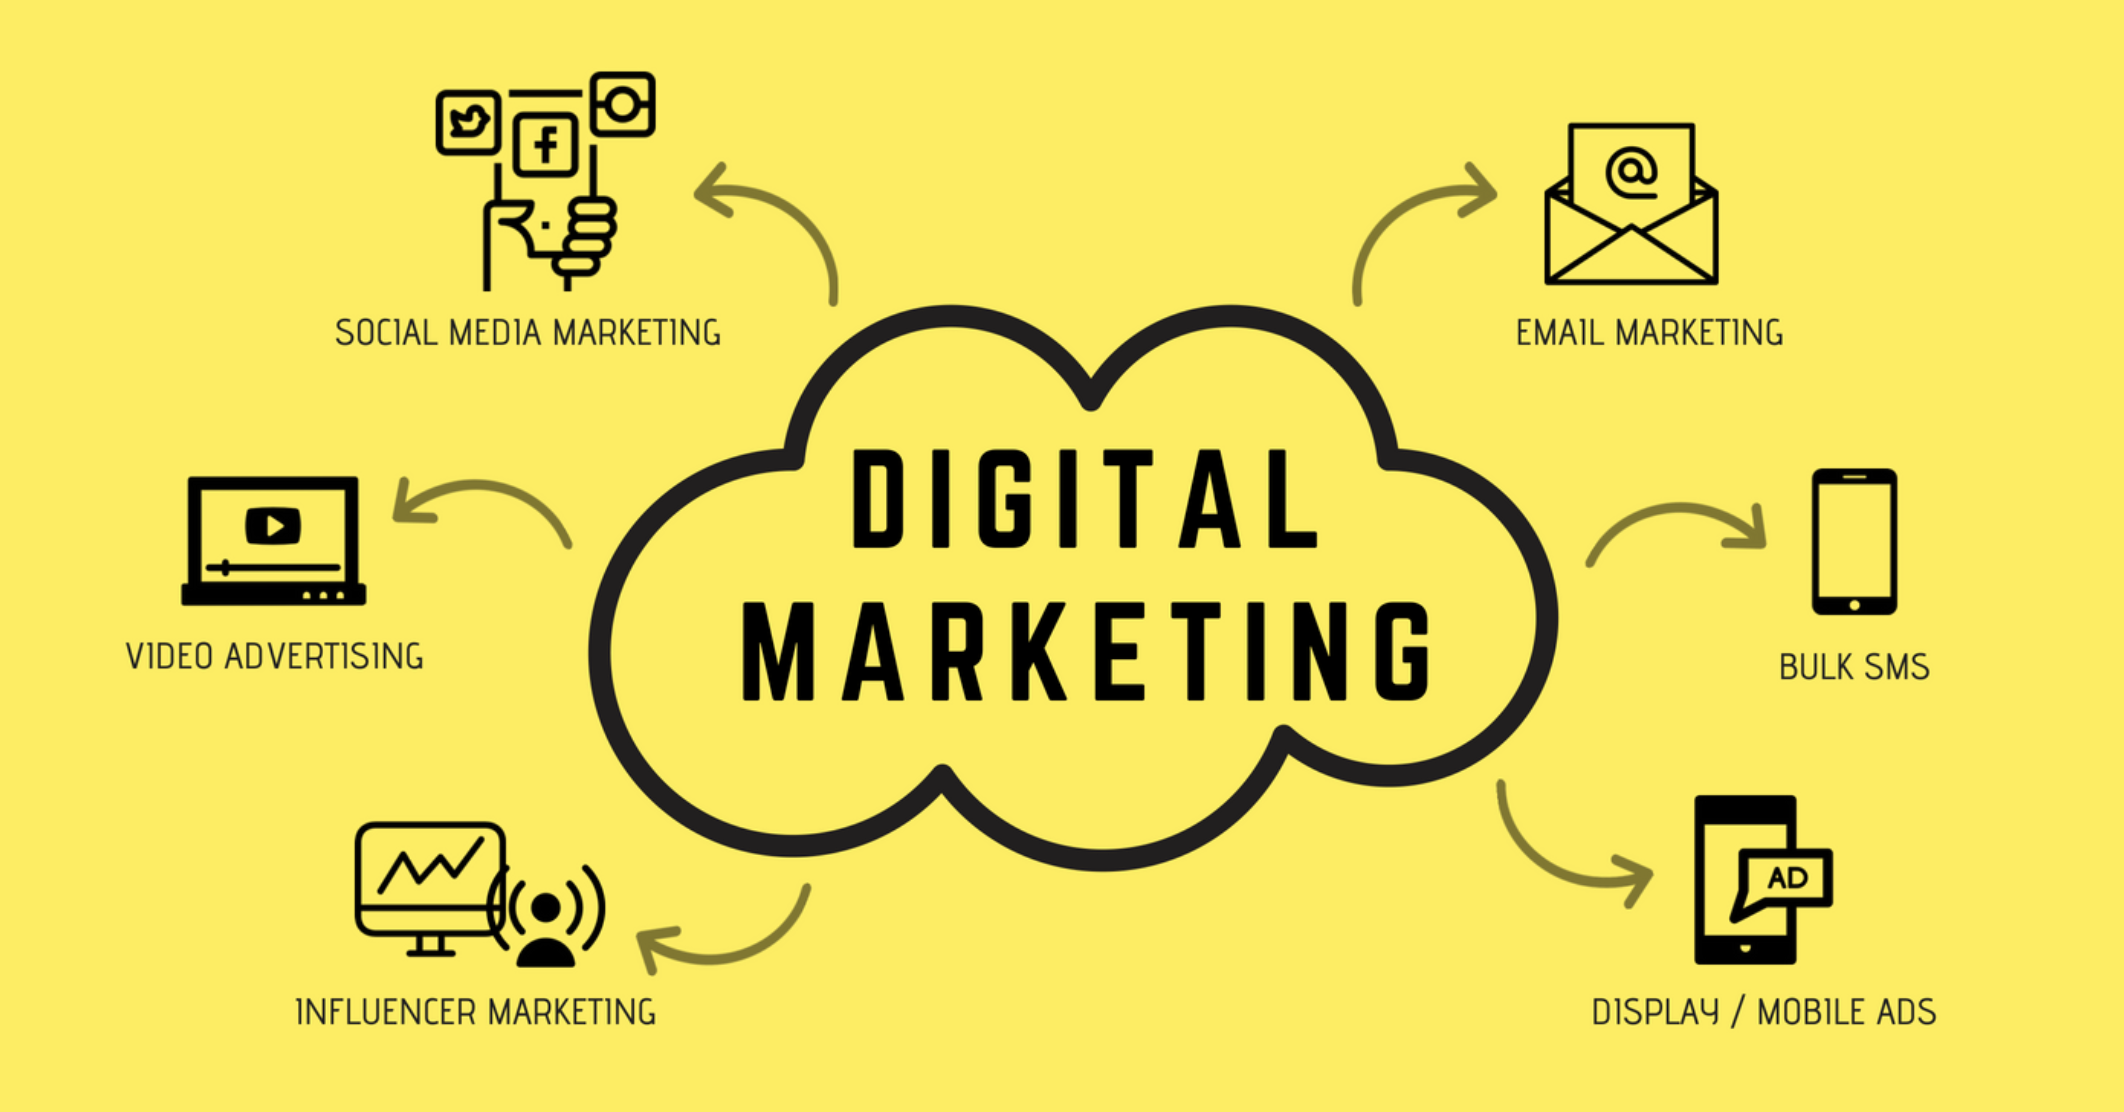 Legal Do’s and Don’ts of Digital Marketing